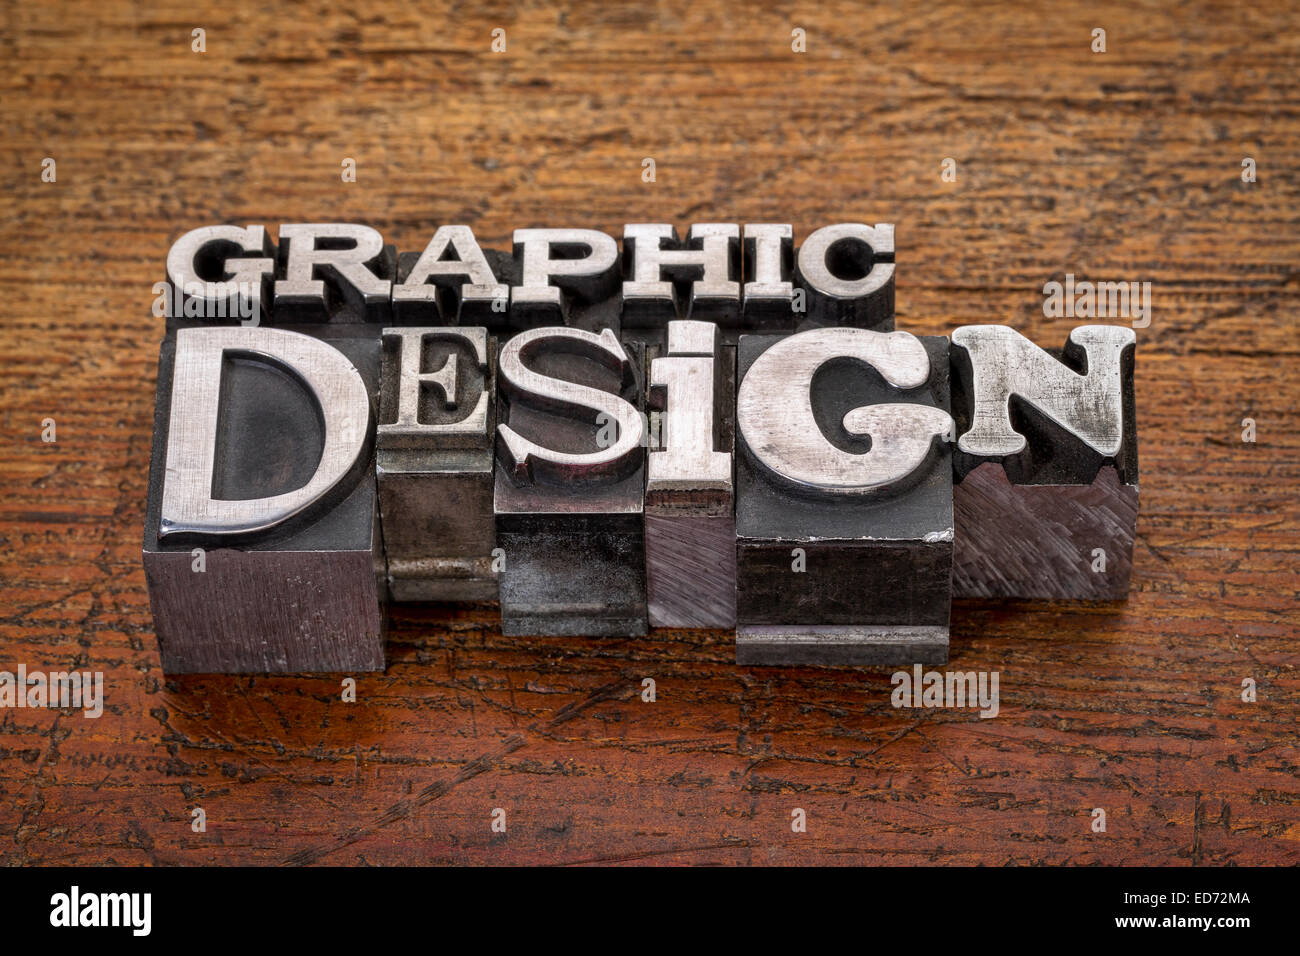 graphic design text in mixed vintage metal type printing blocks over grunge wood Stock Photo